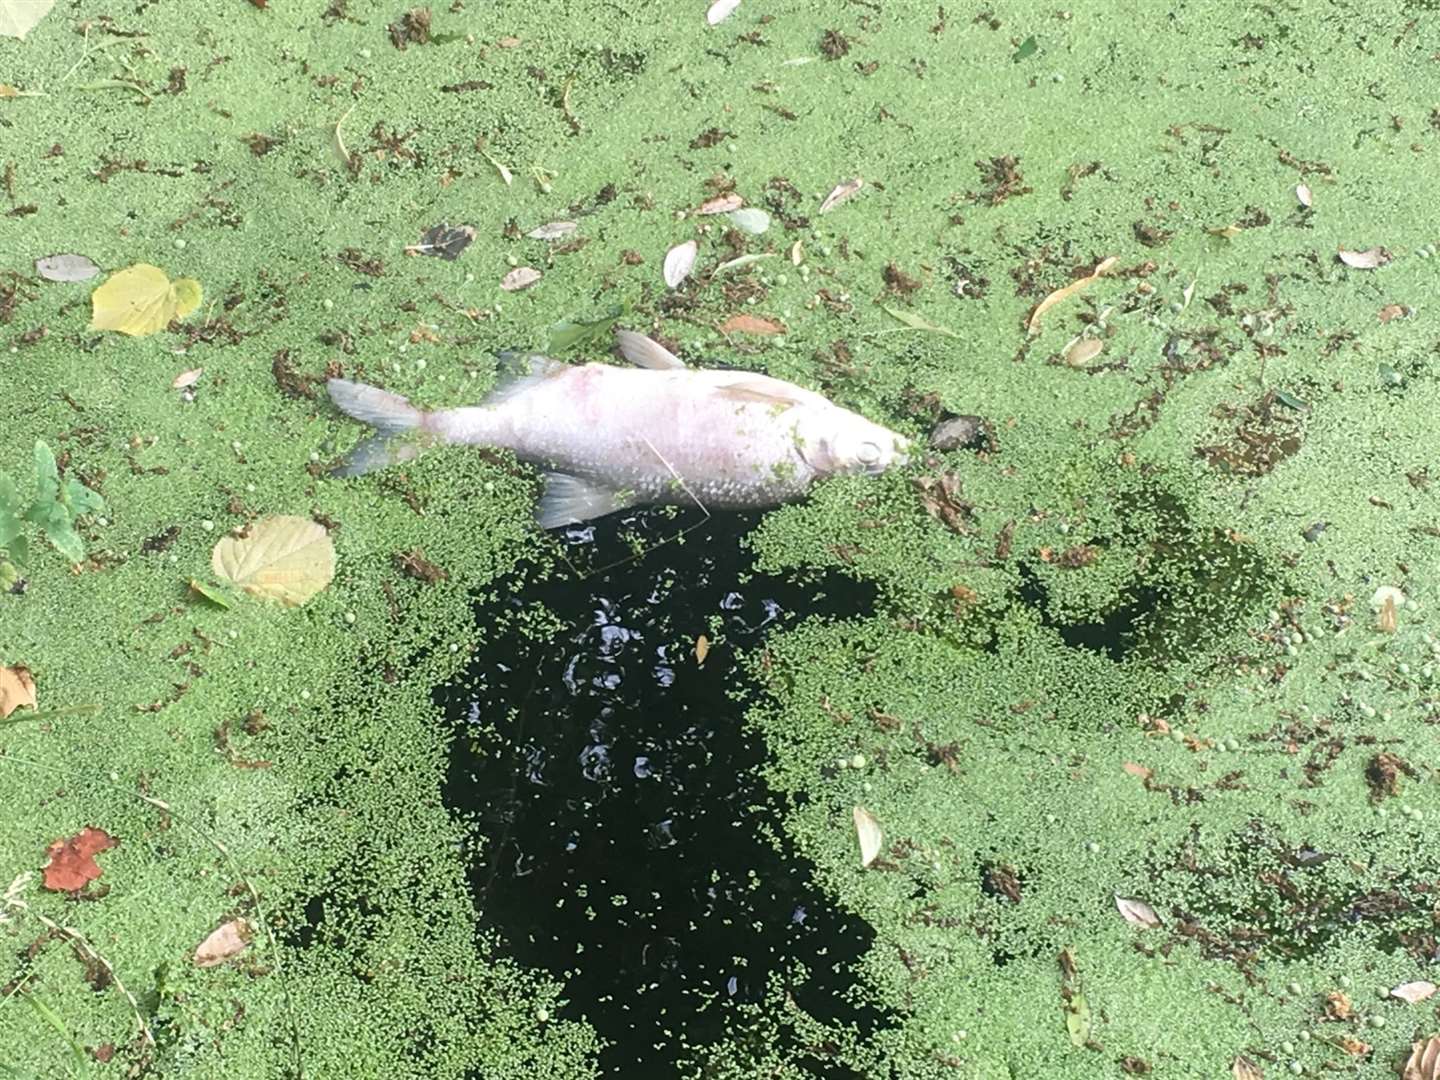 A dead fish spotted in the water in August Picture: Frank Todd